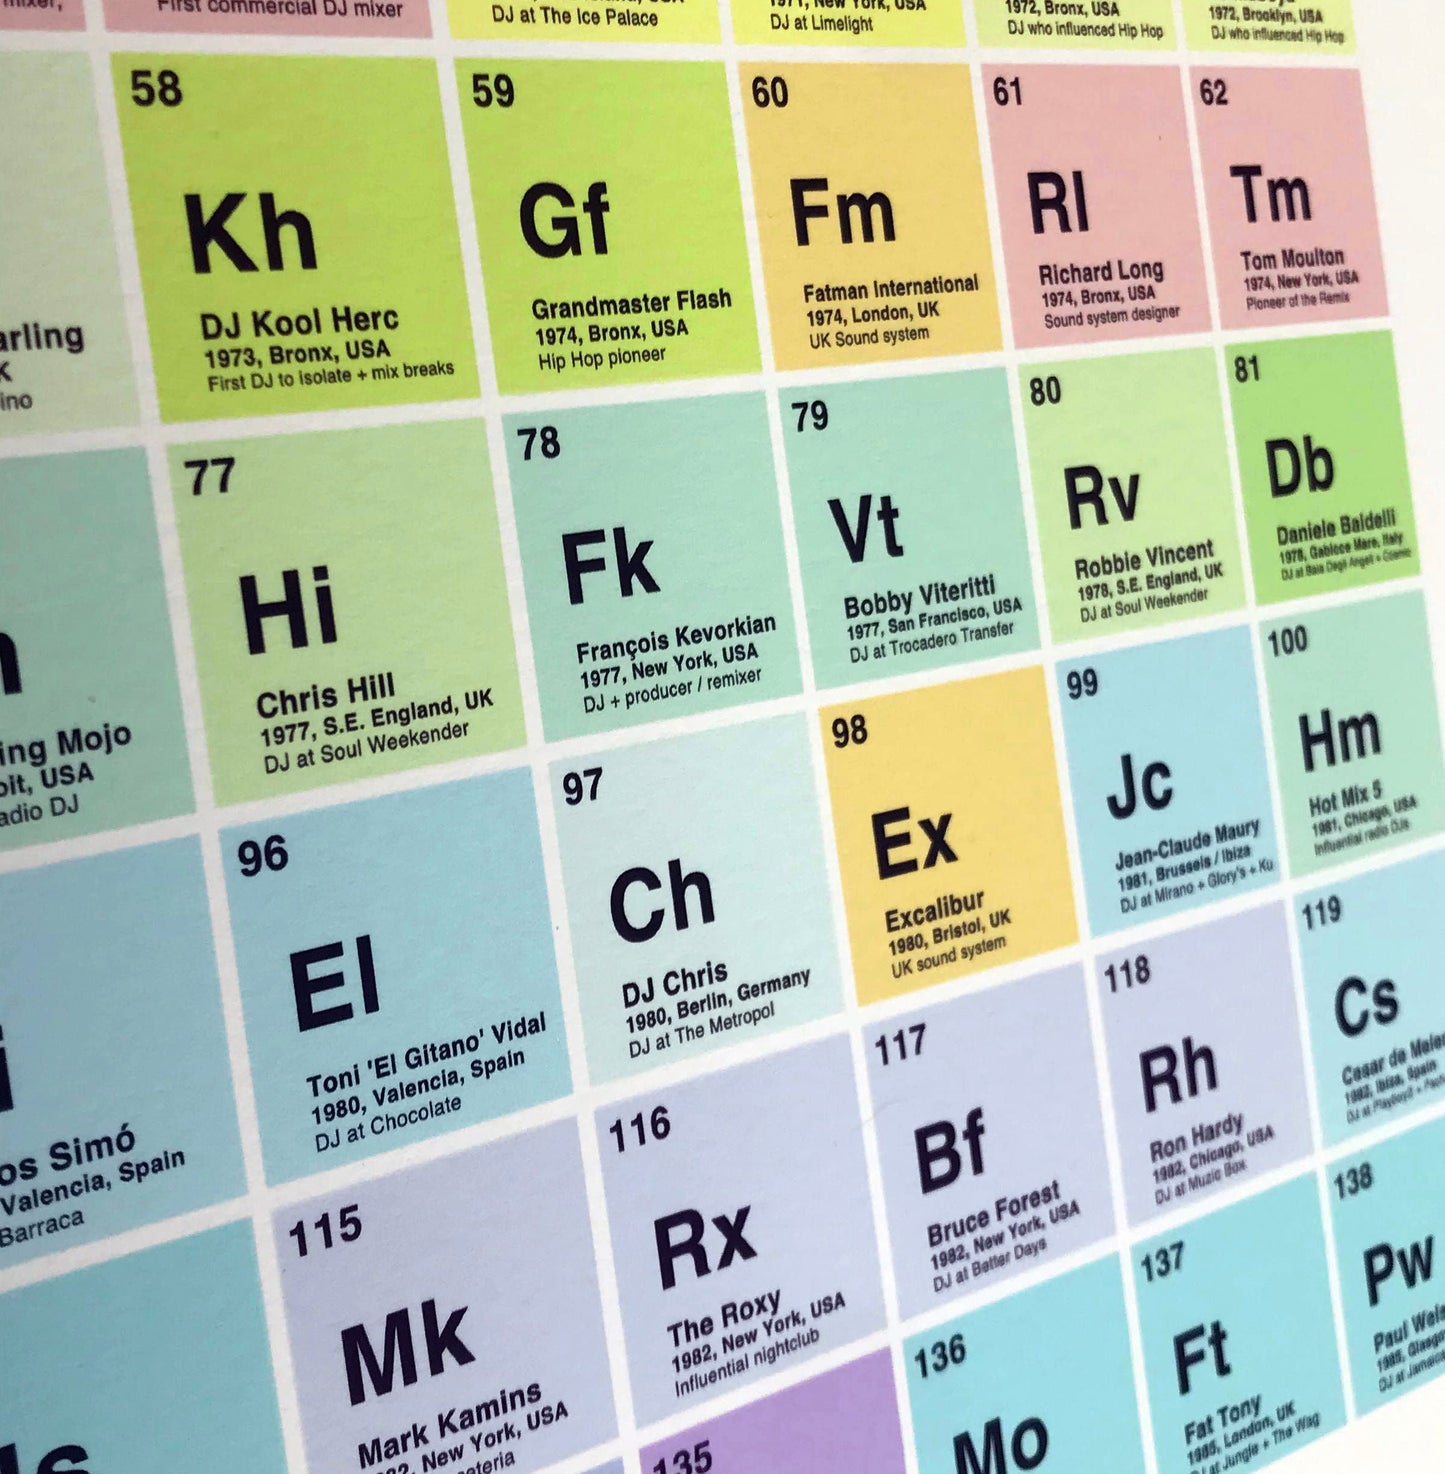 Periodic Table Of The DJ (A1), 2021